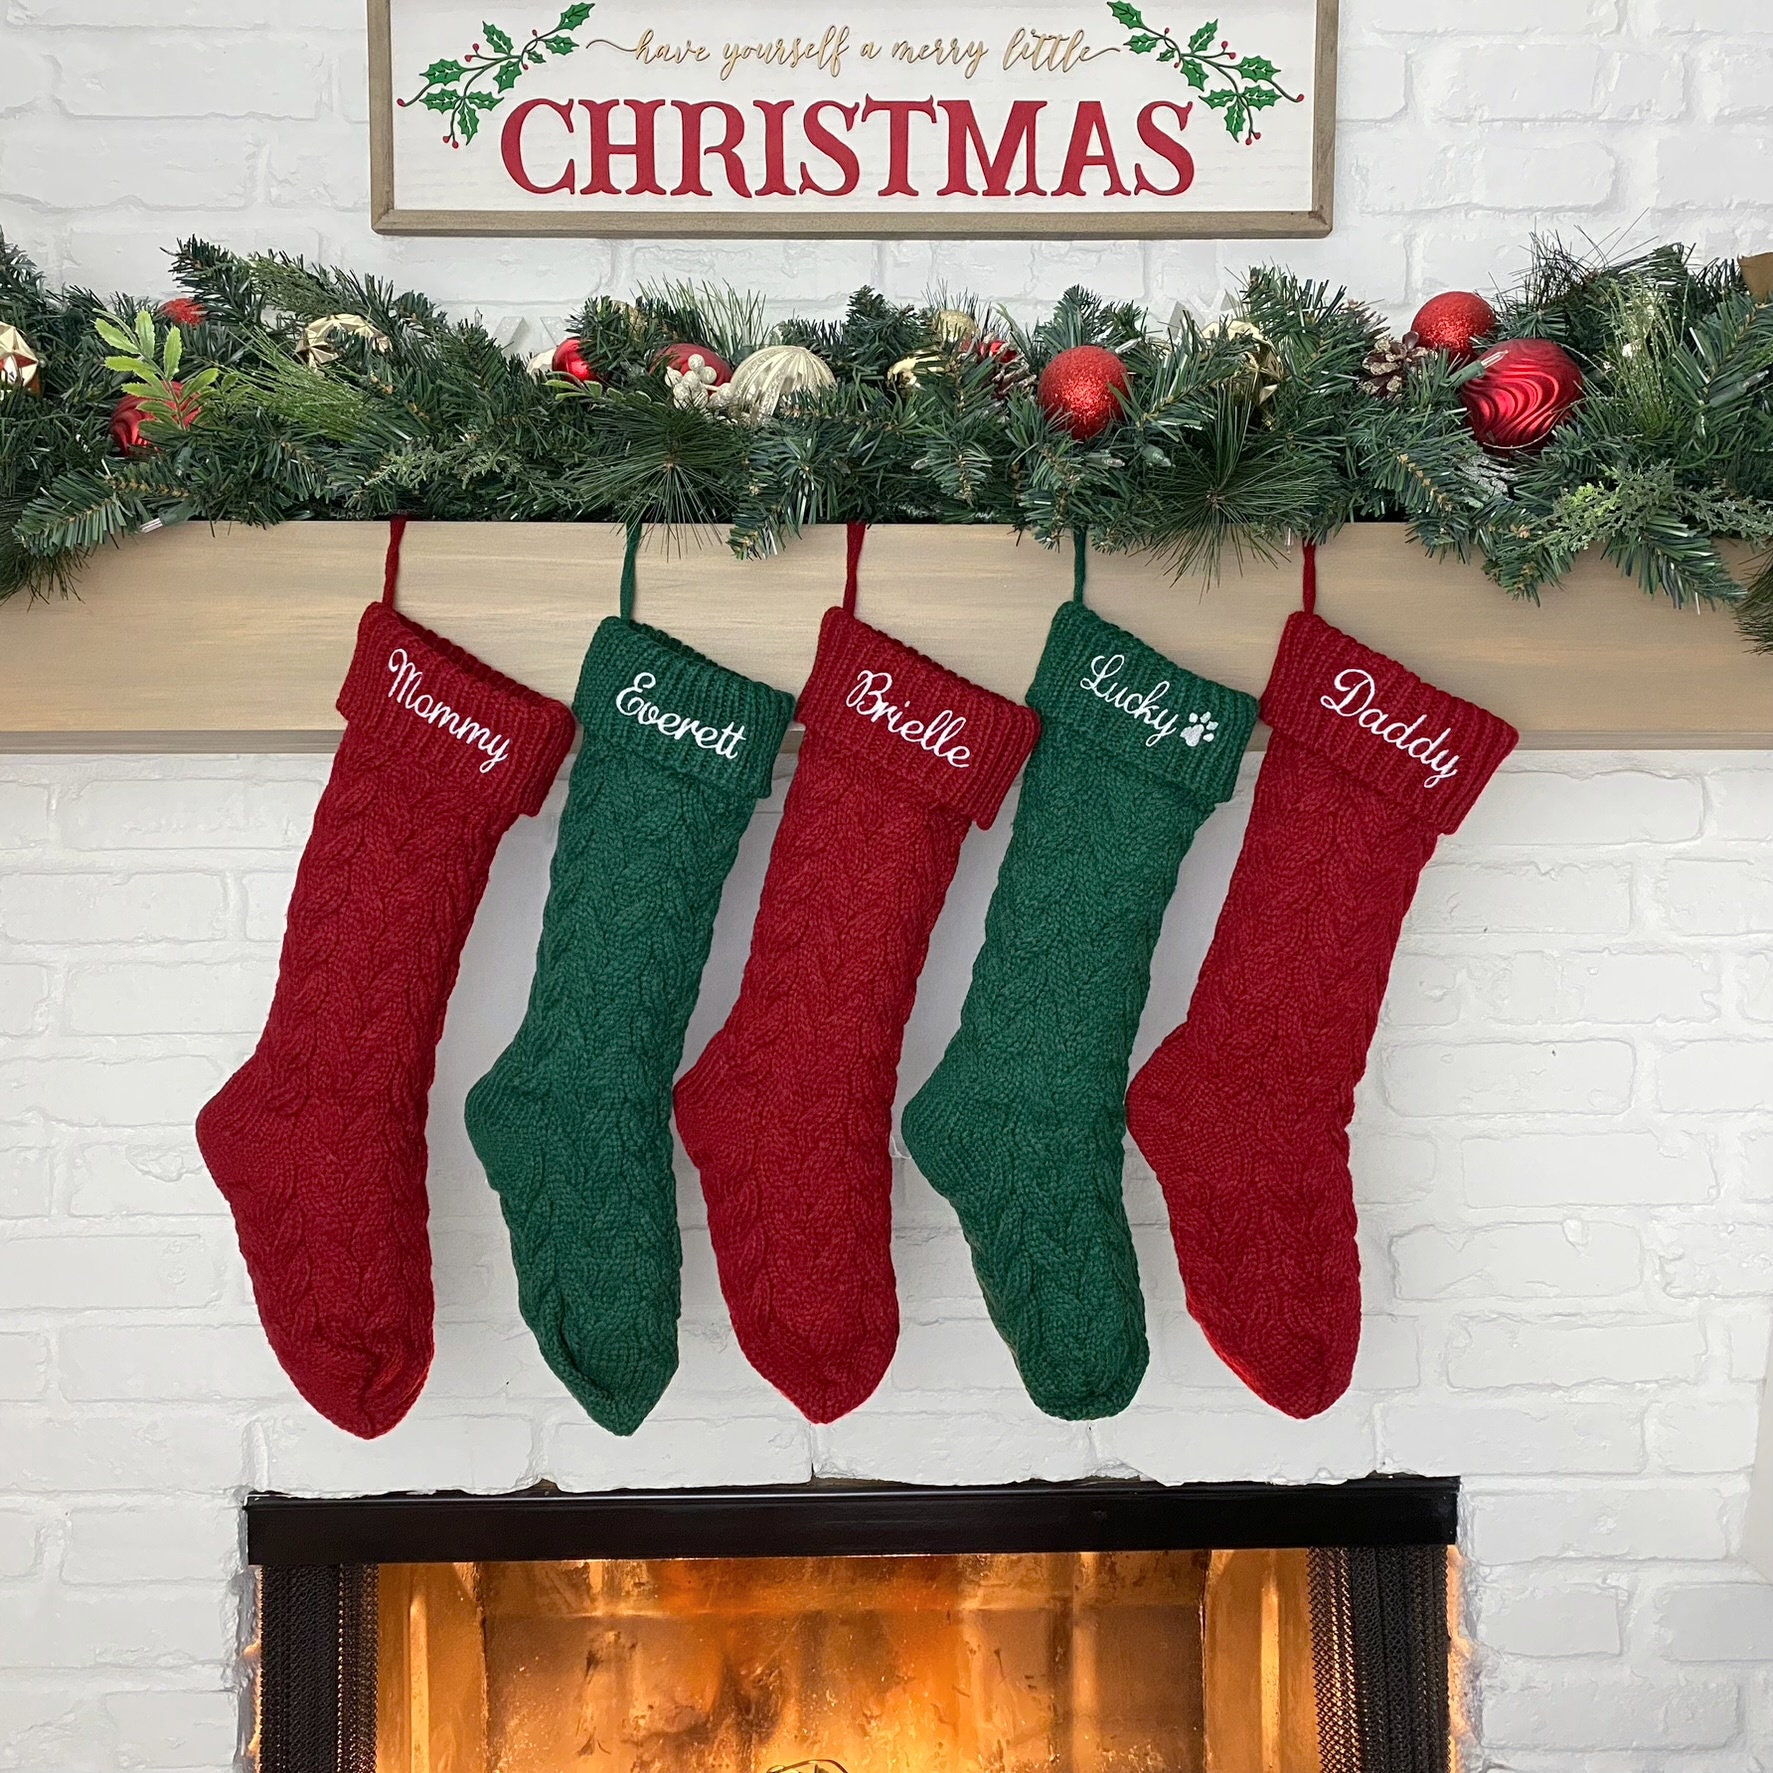 Personalized Reindeer Christmas Stocking – Hand Knit Holiday